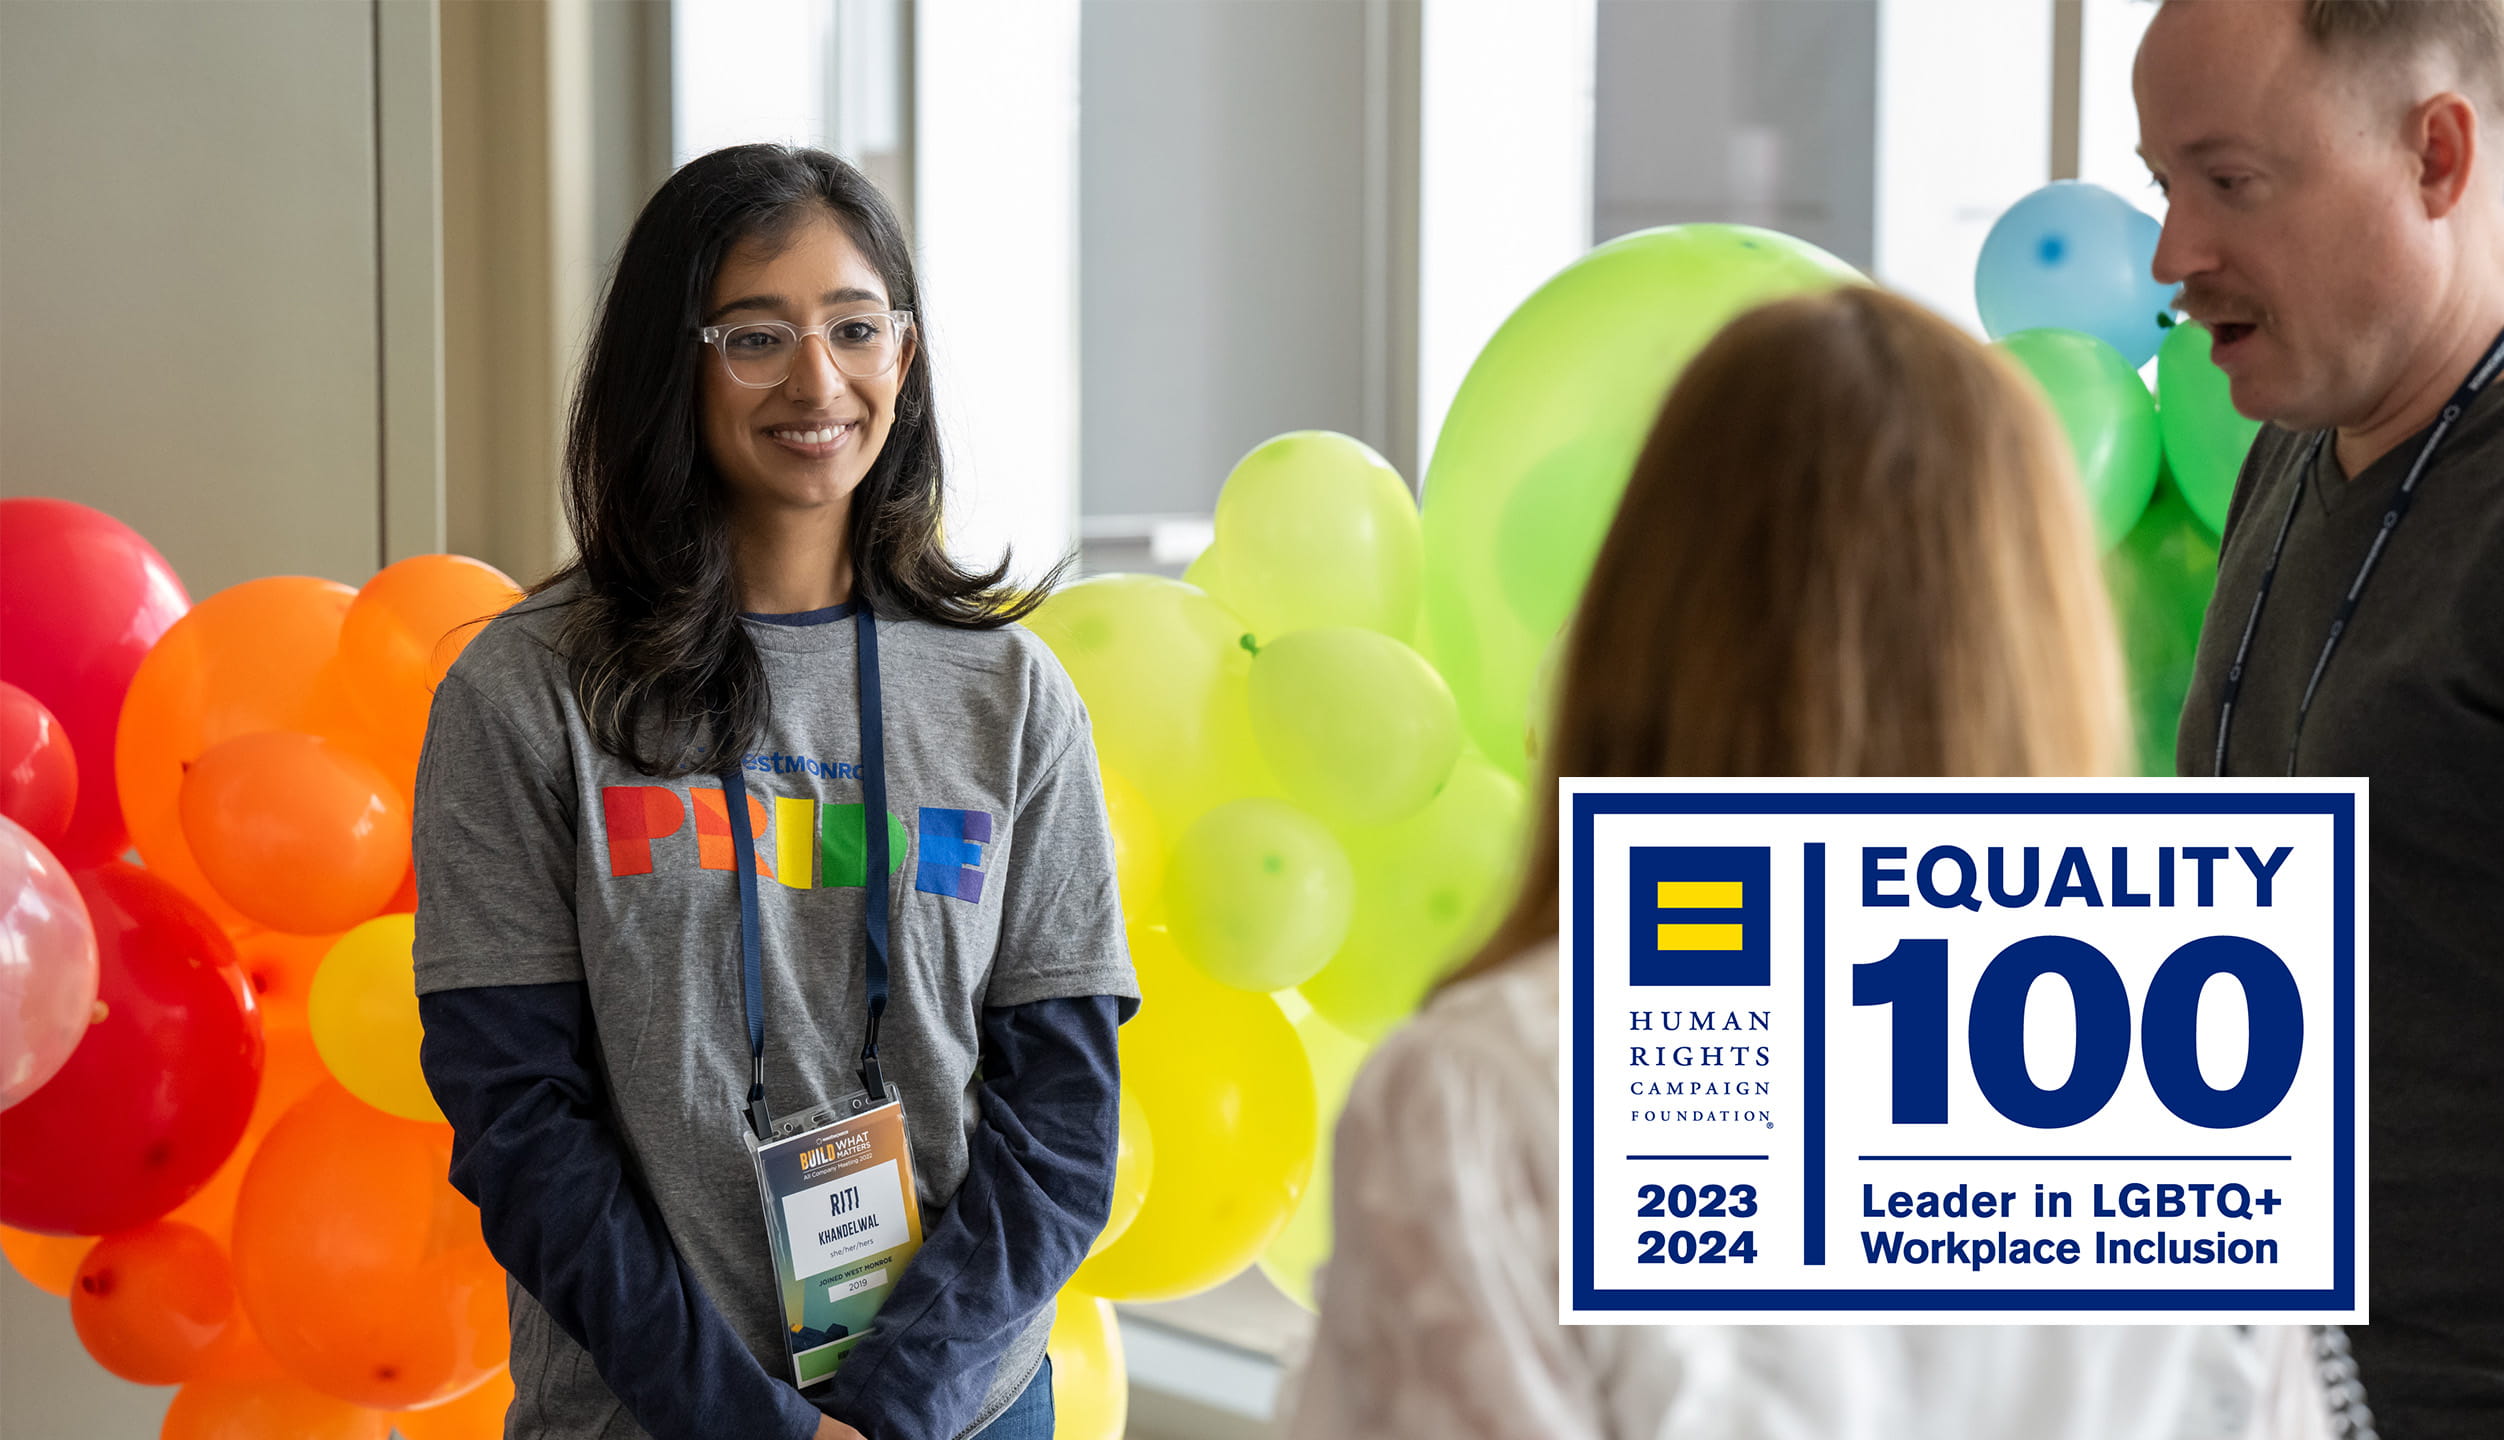 West Monroe receives perfect score in Human Rights Campaign Foundation’s 2023-2024 Corporate Equality Index